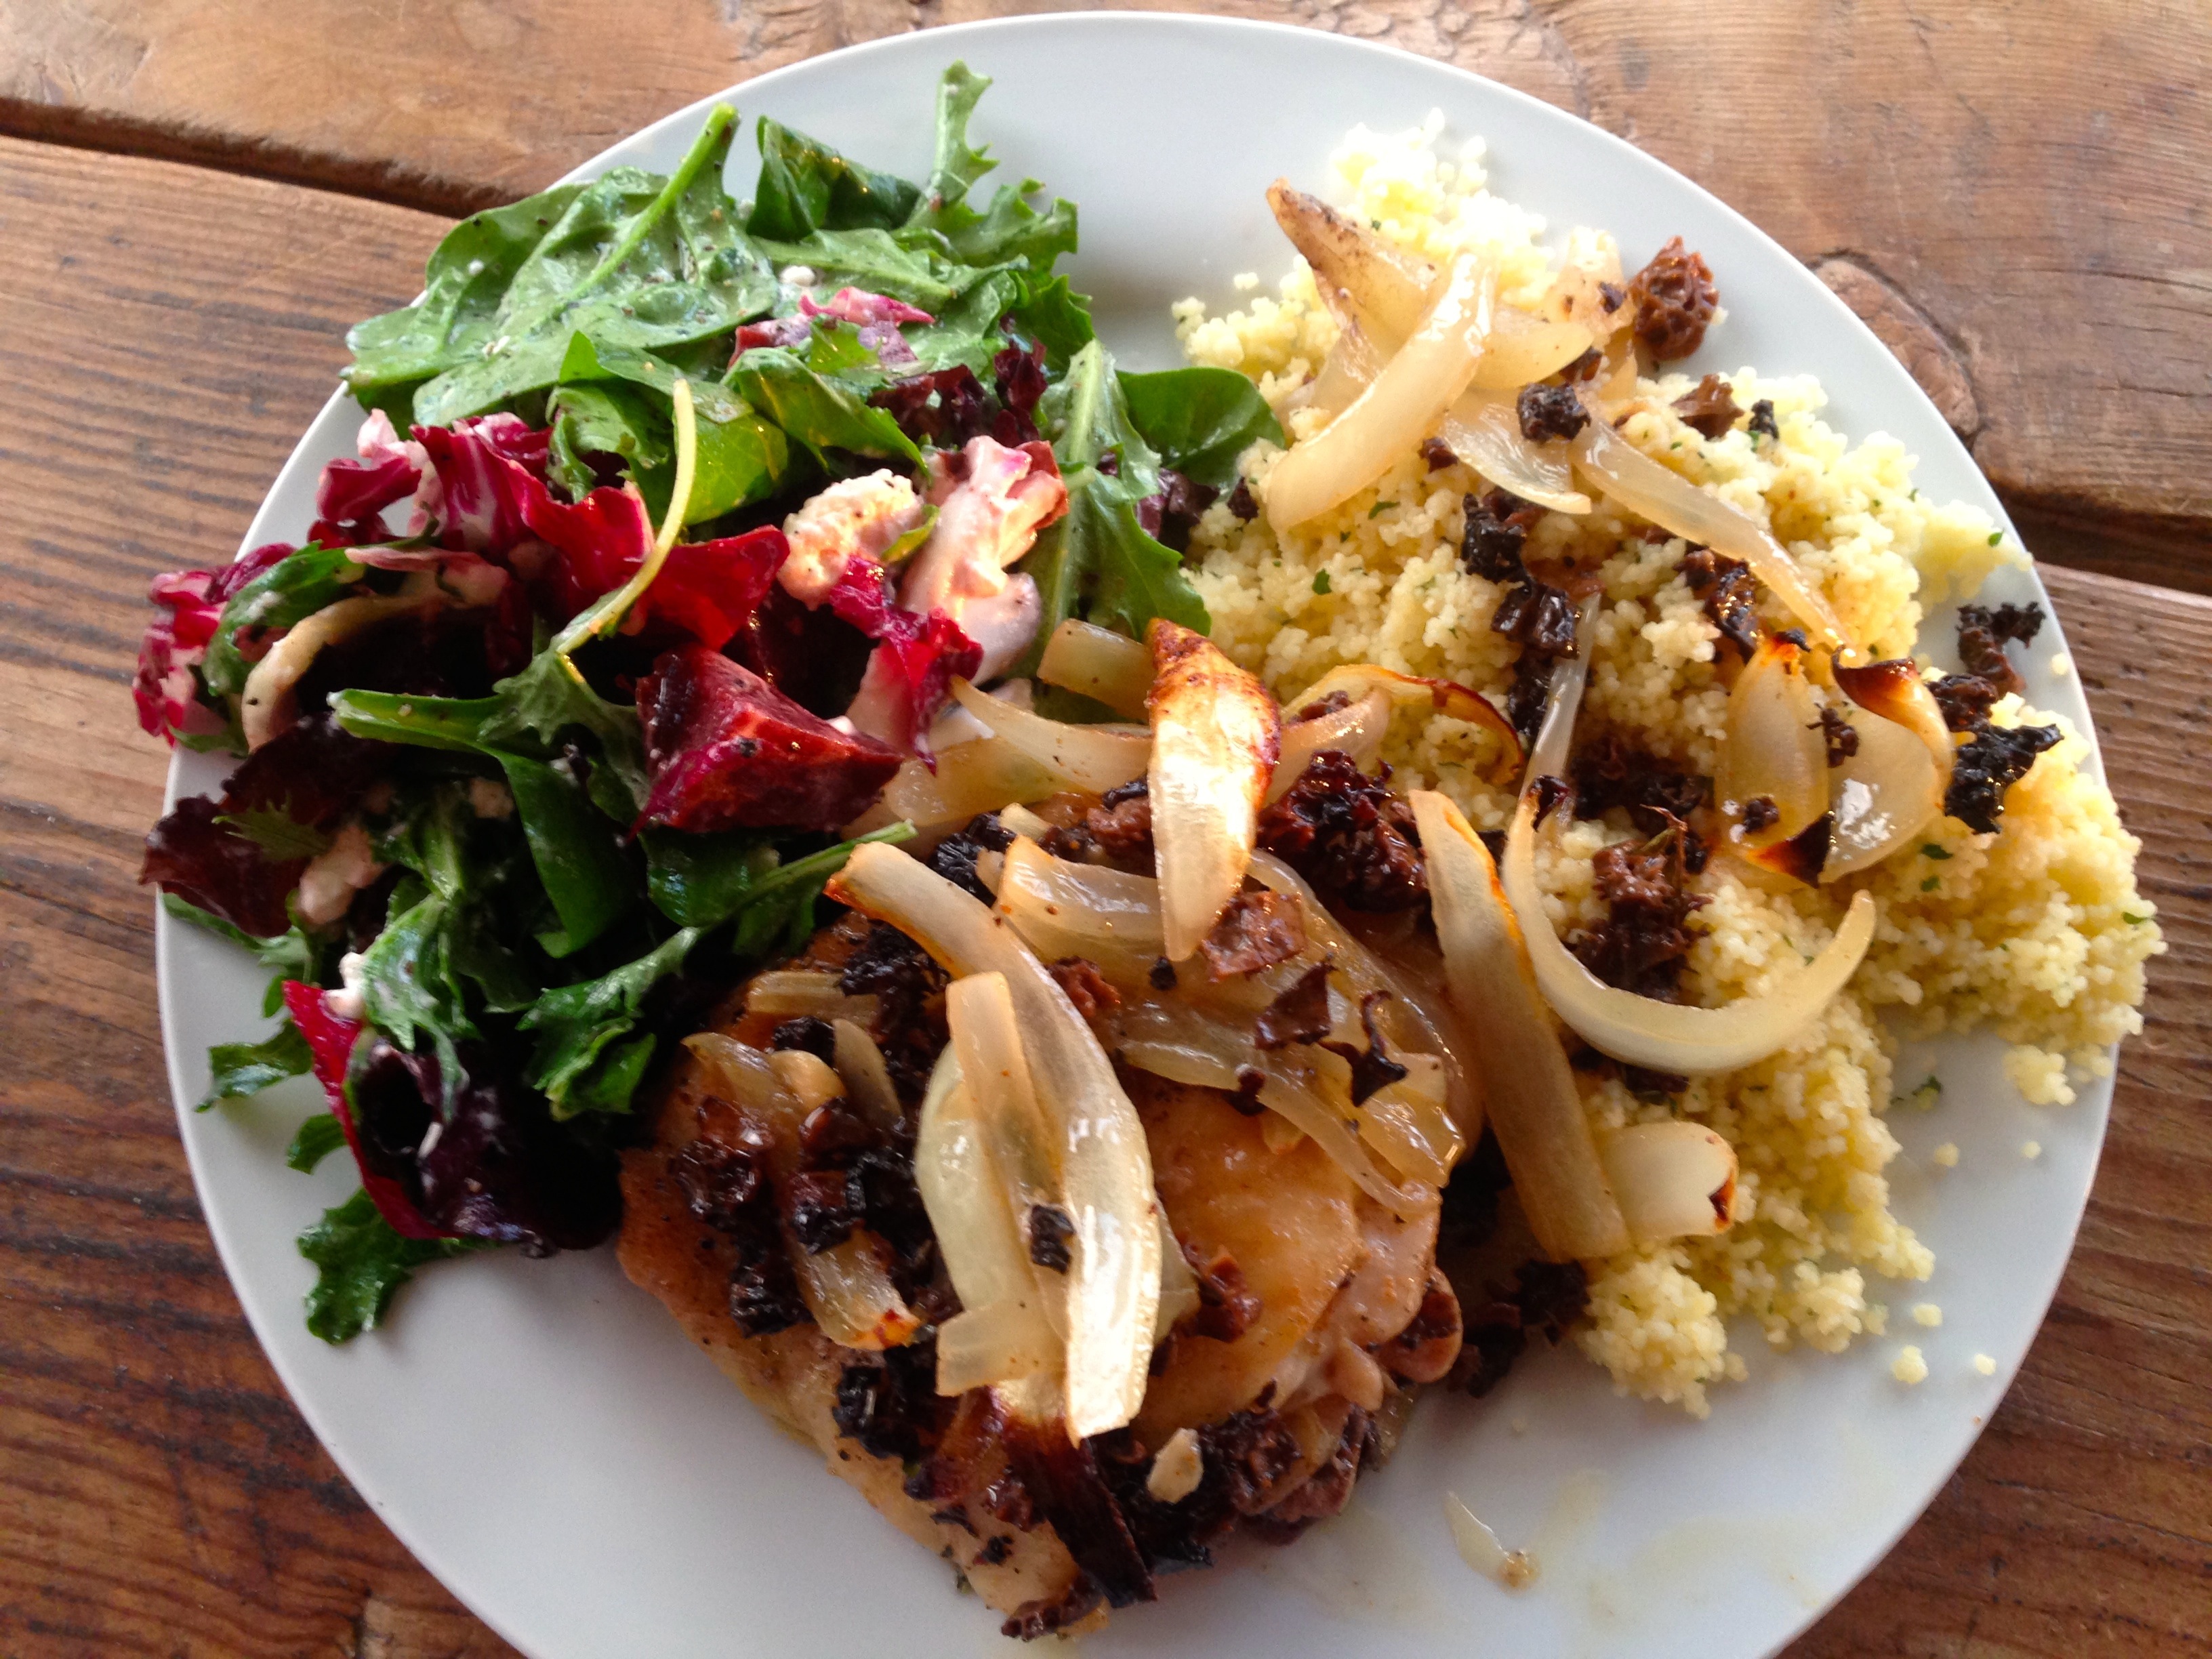 Roasted chicken thighs with couscous and salad